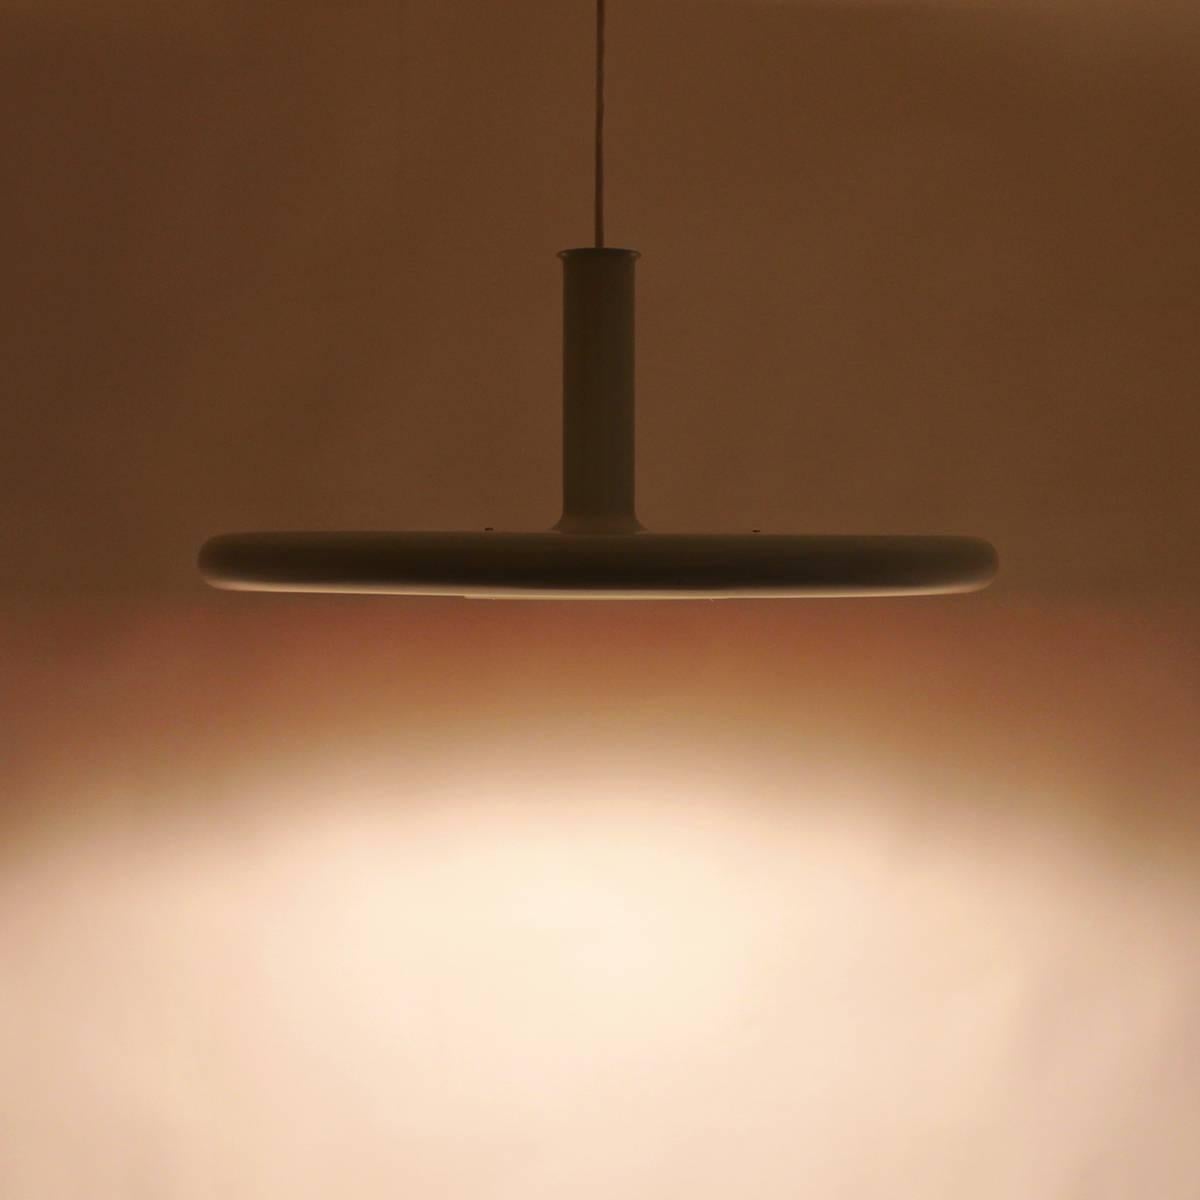 OPTIMA 7 - large white ceiling light by Hans Due for Fog & Mørup in 1972 - super minimalist space age lighting in very good vintage condition.

The OPTIMA is characterized by its soft lines with a clear influence from space age design. Featuring an